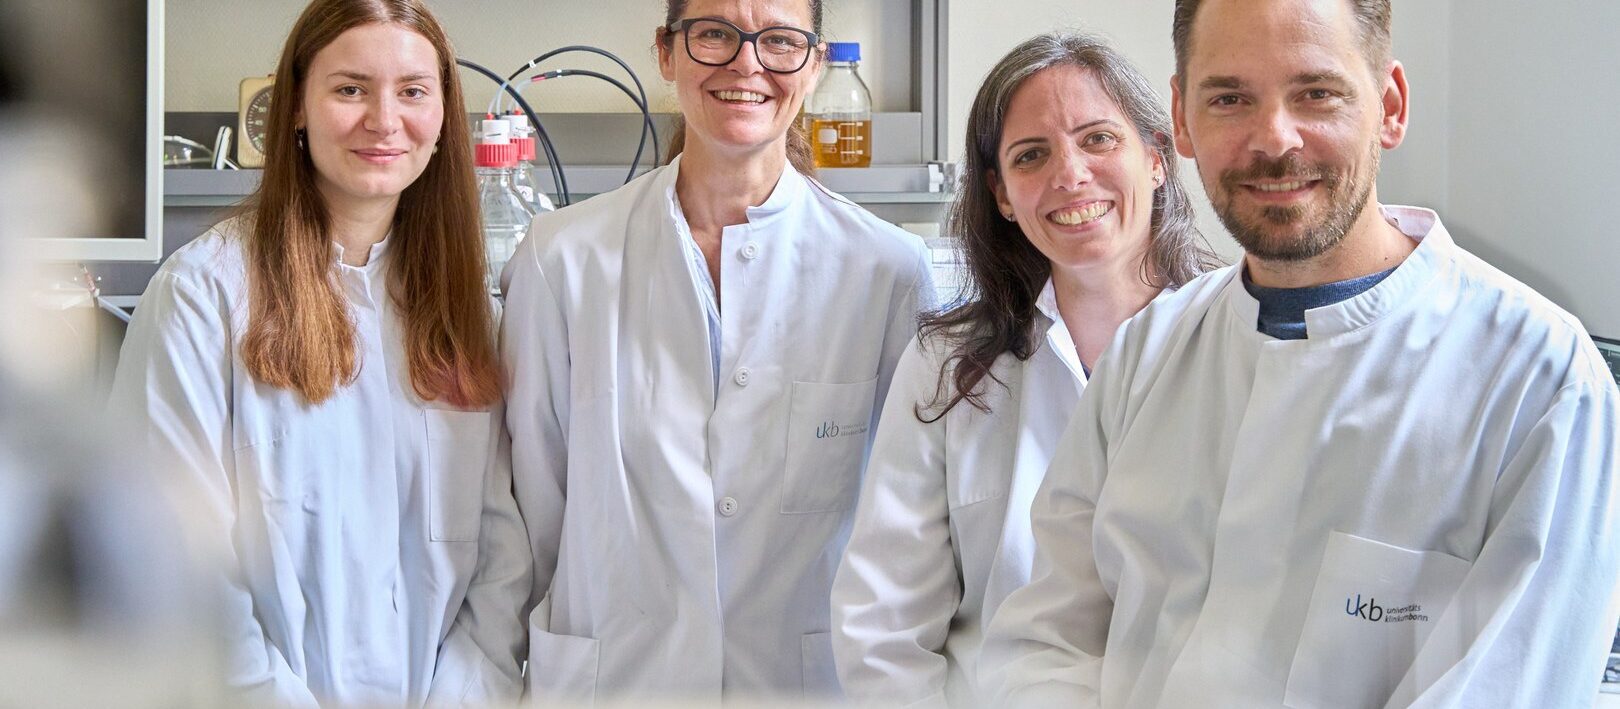 The team at the Institute of Pharmaceutical Microbiology: - (from left) Annika Krüger, Prof. Dr. Tanja Schneider, Dr. Stefania De Benedetti and Dr. Fabian Grein.